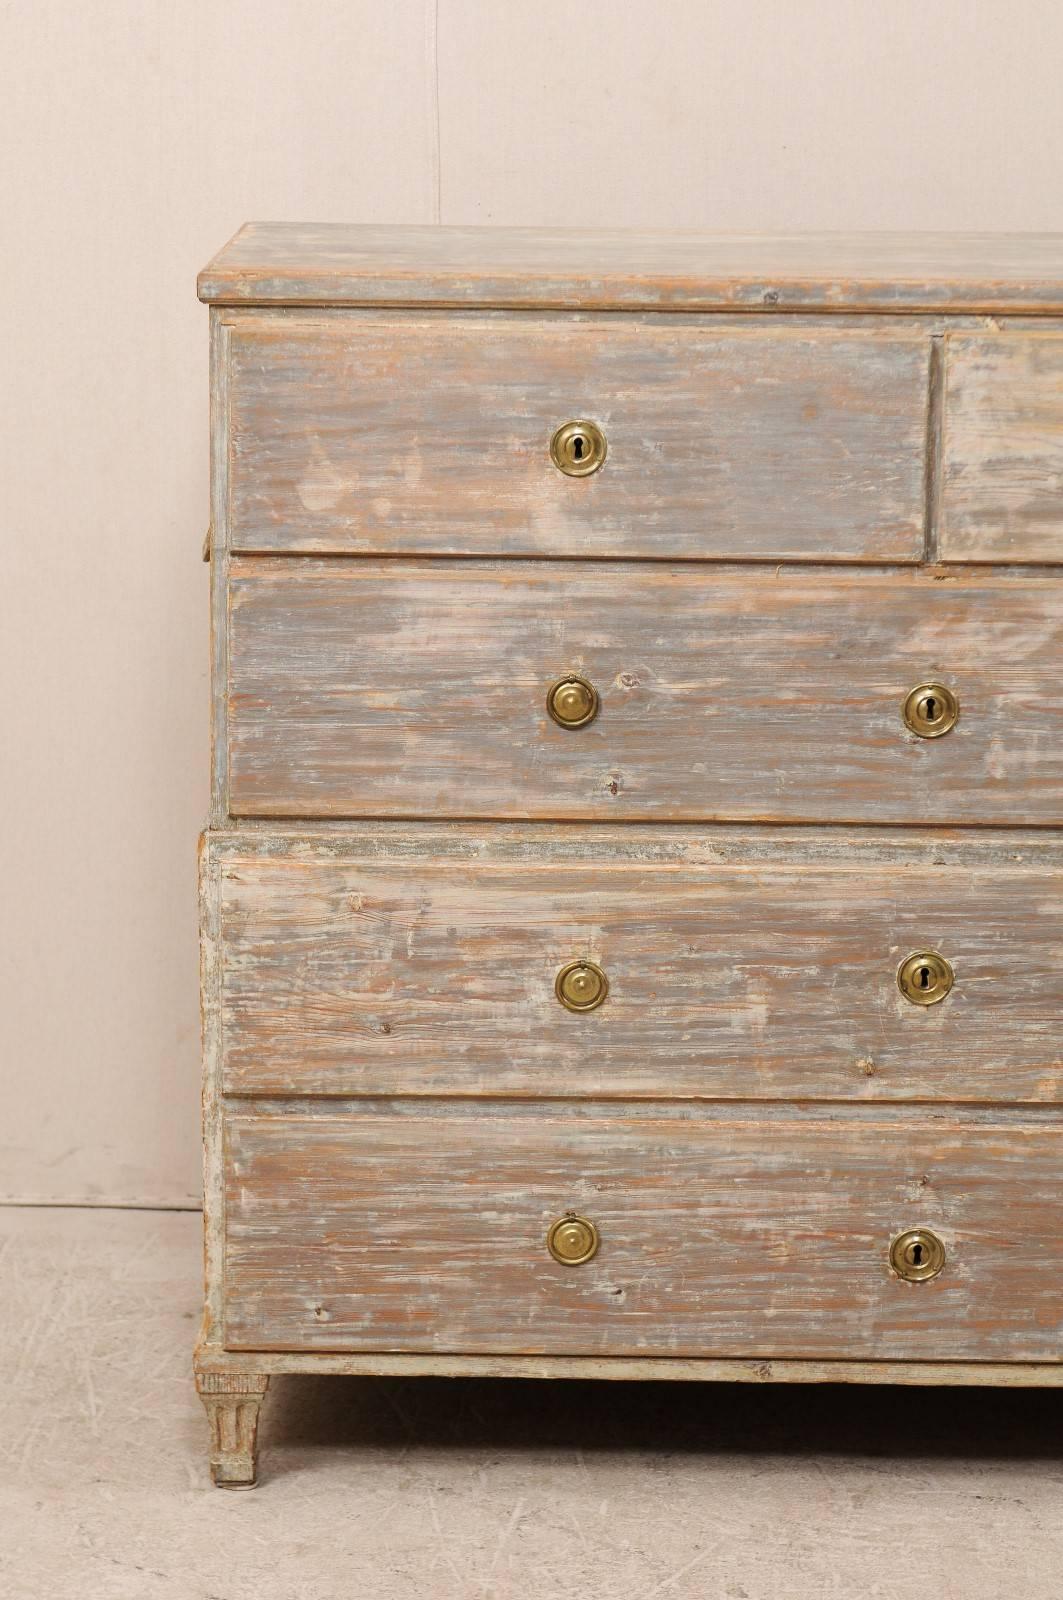 Painted Swedish Late 18th Century Five-Drawer Wood Chest with Scraped Paint